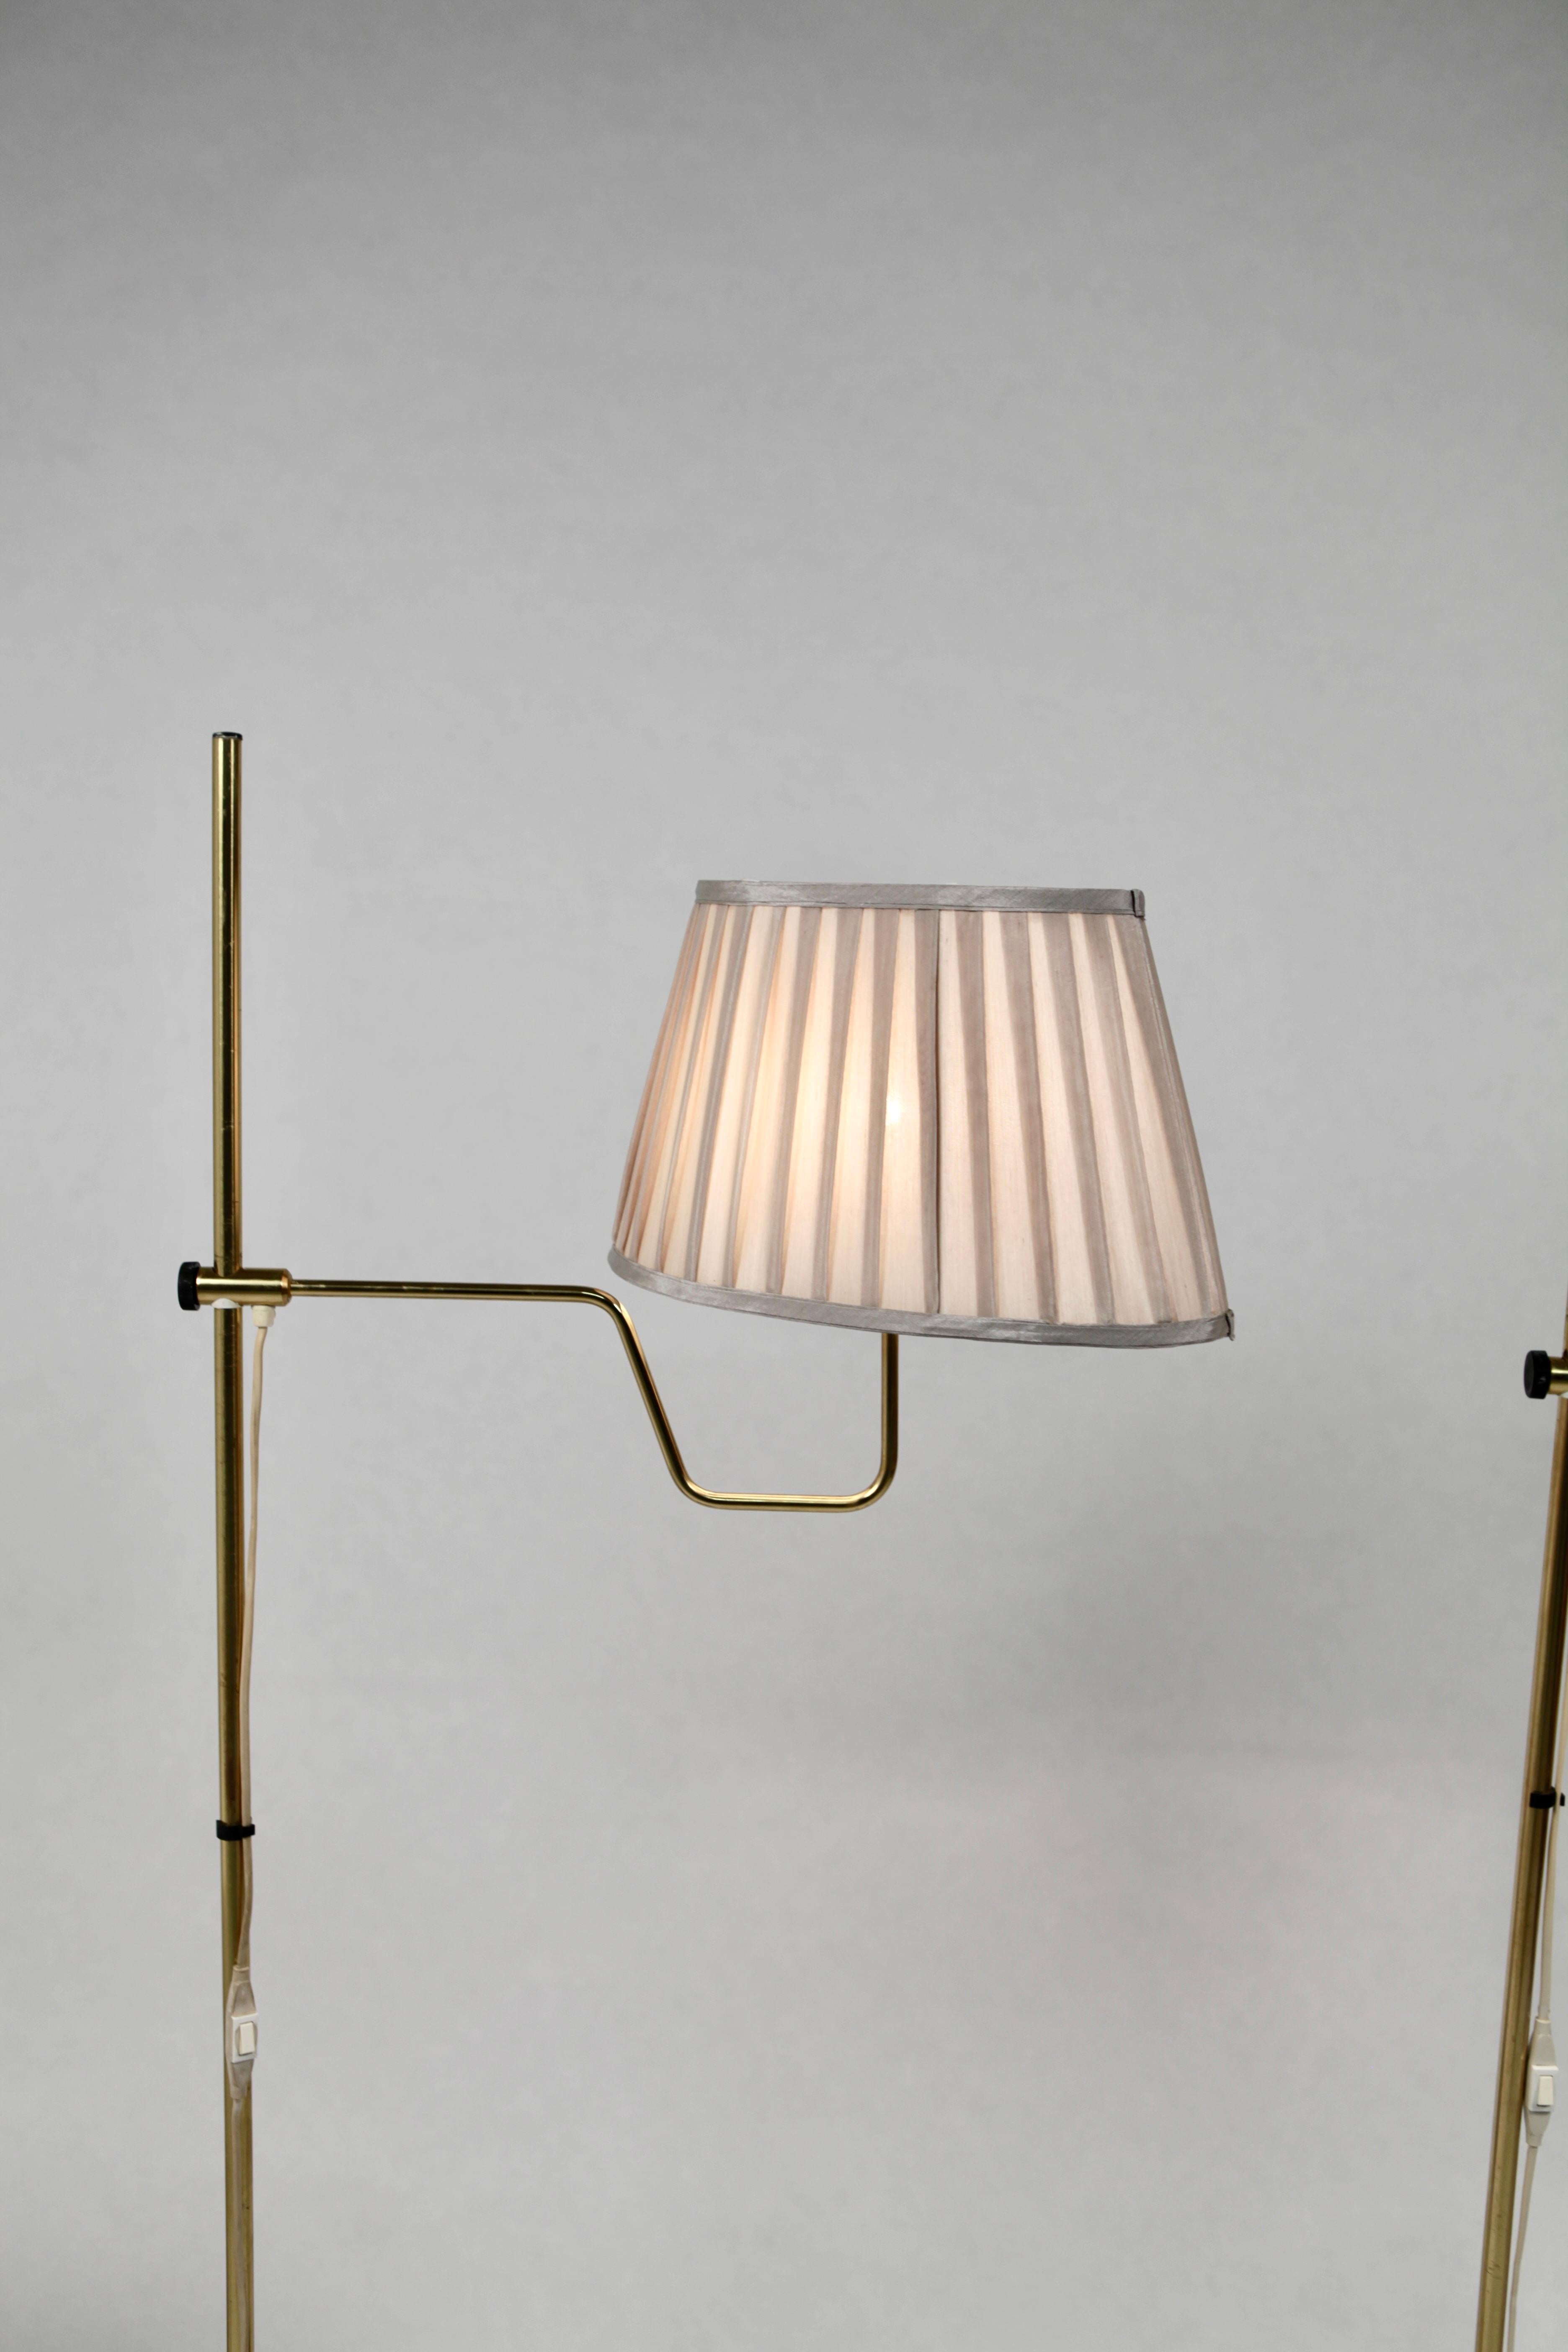 Mid-20th Century Hans-Agne Jakobsson, Pair of Rare Floor Lamps, Model G-192 M, in Brass, 1950s For Sale